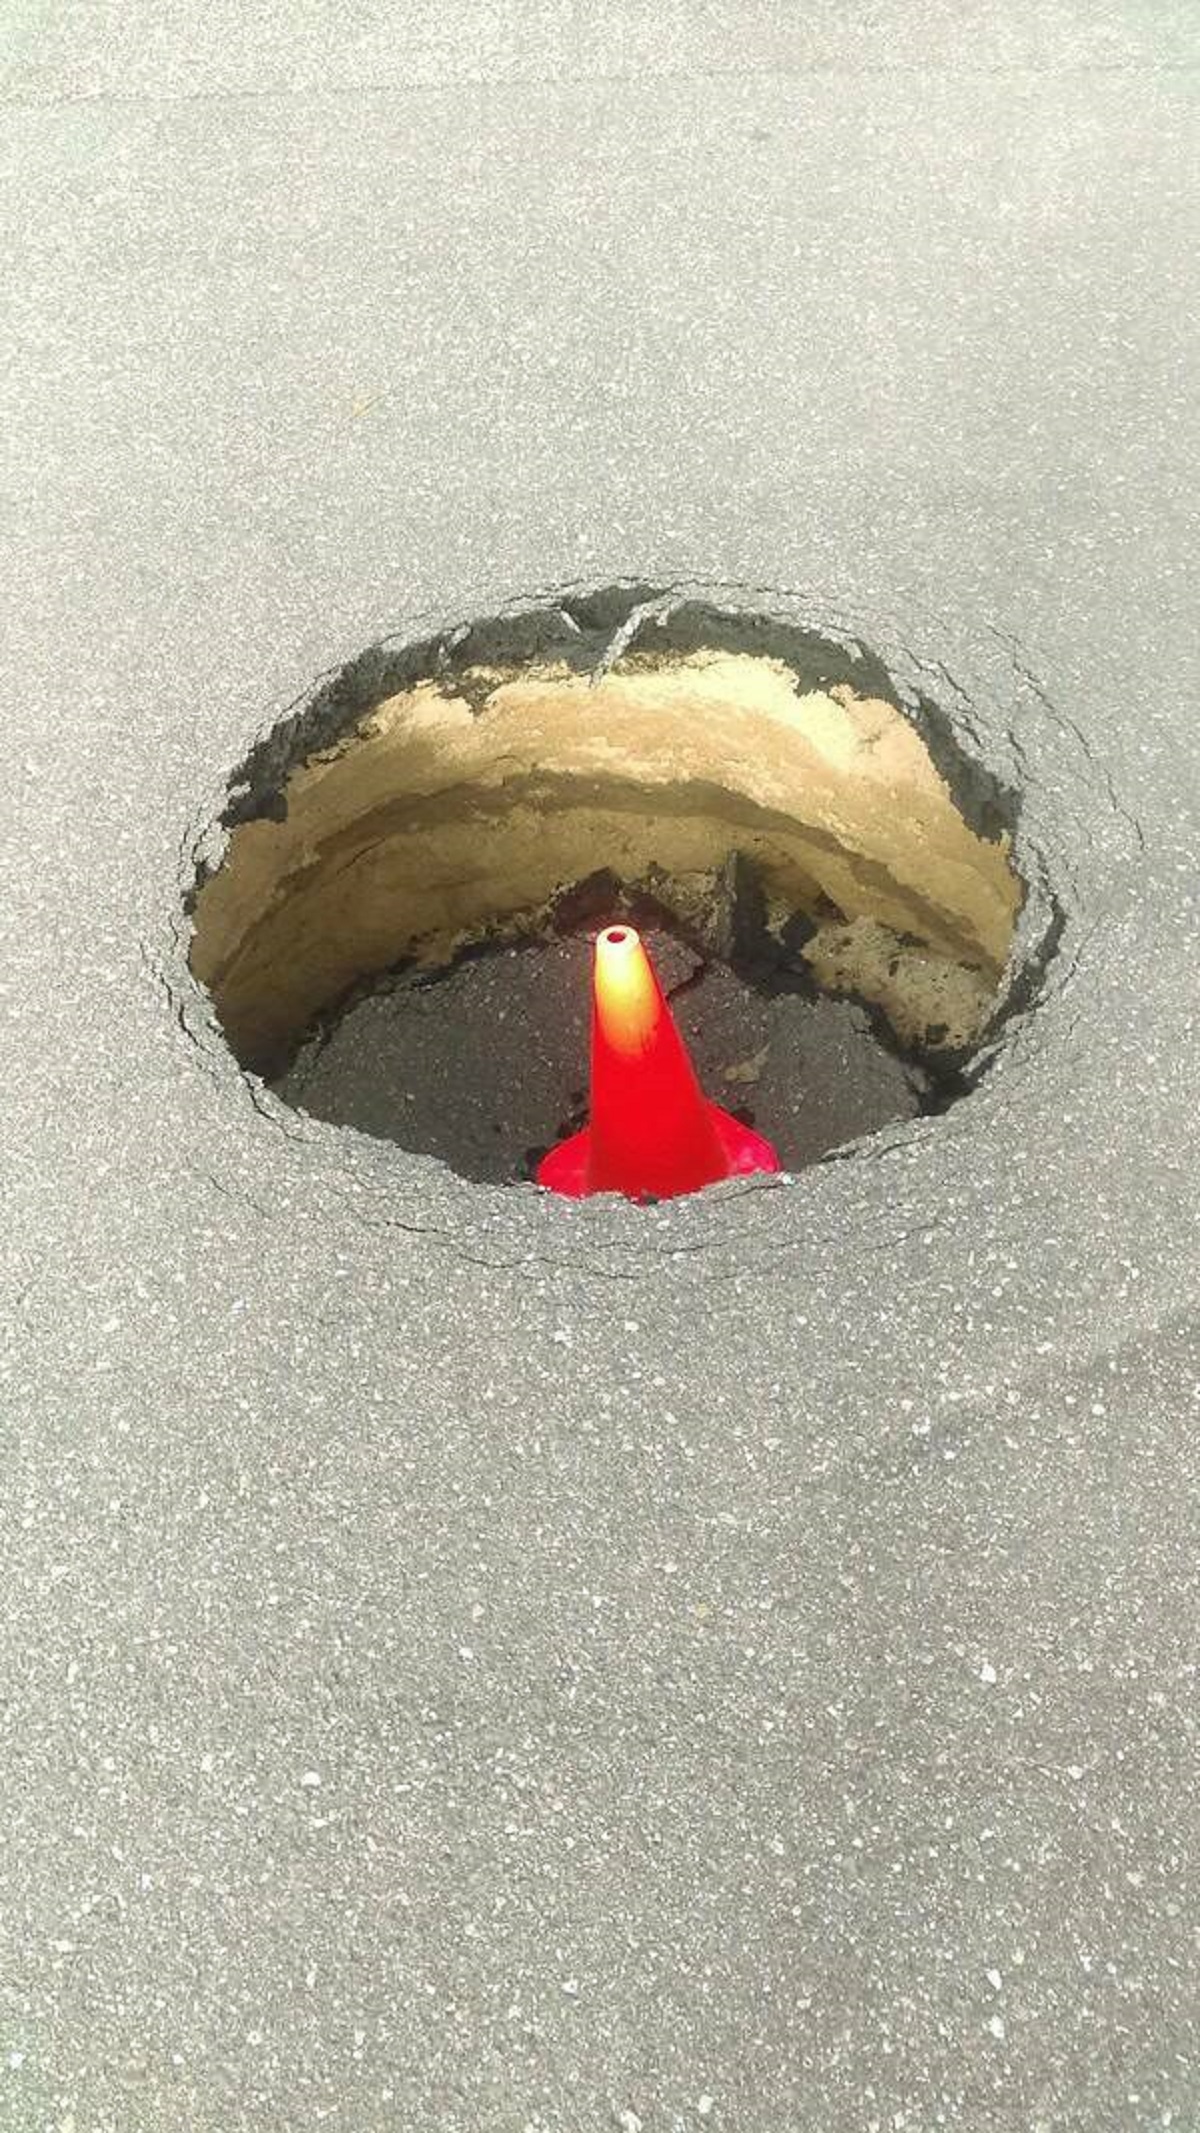 “No one is gonna fall into this hole! There’s a cone!”